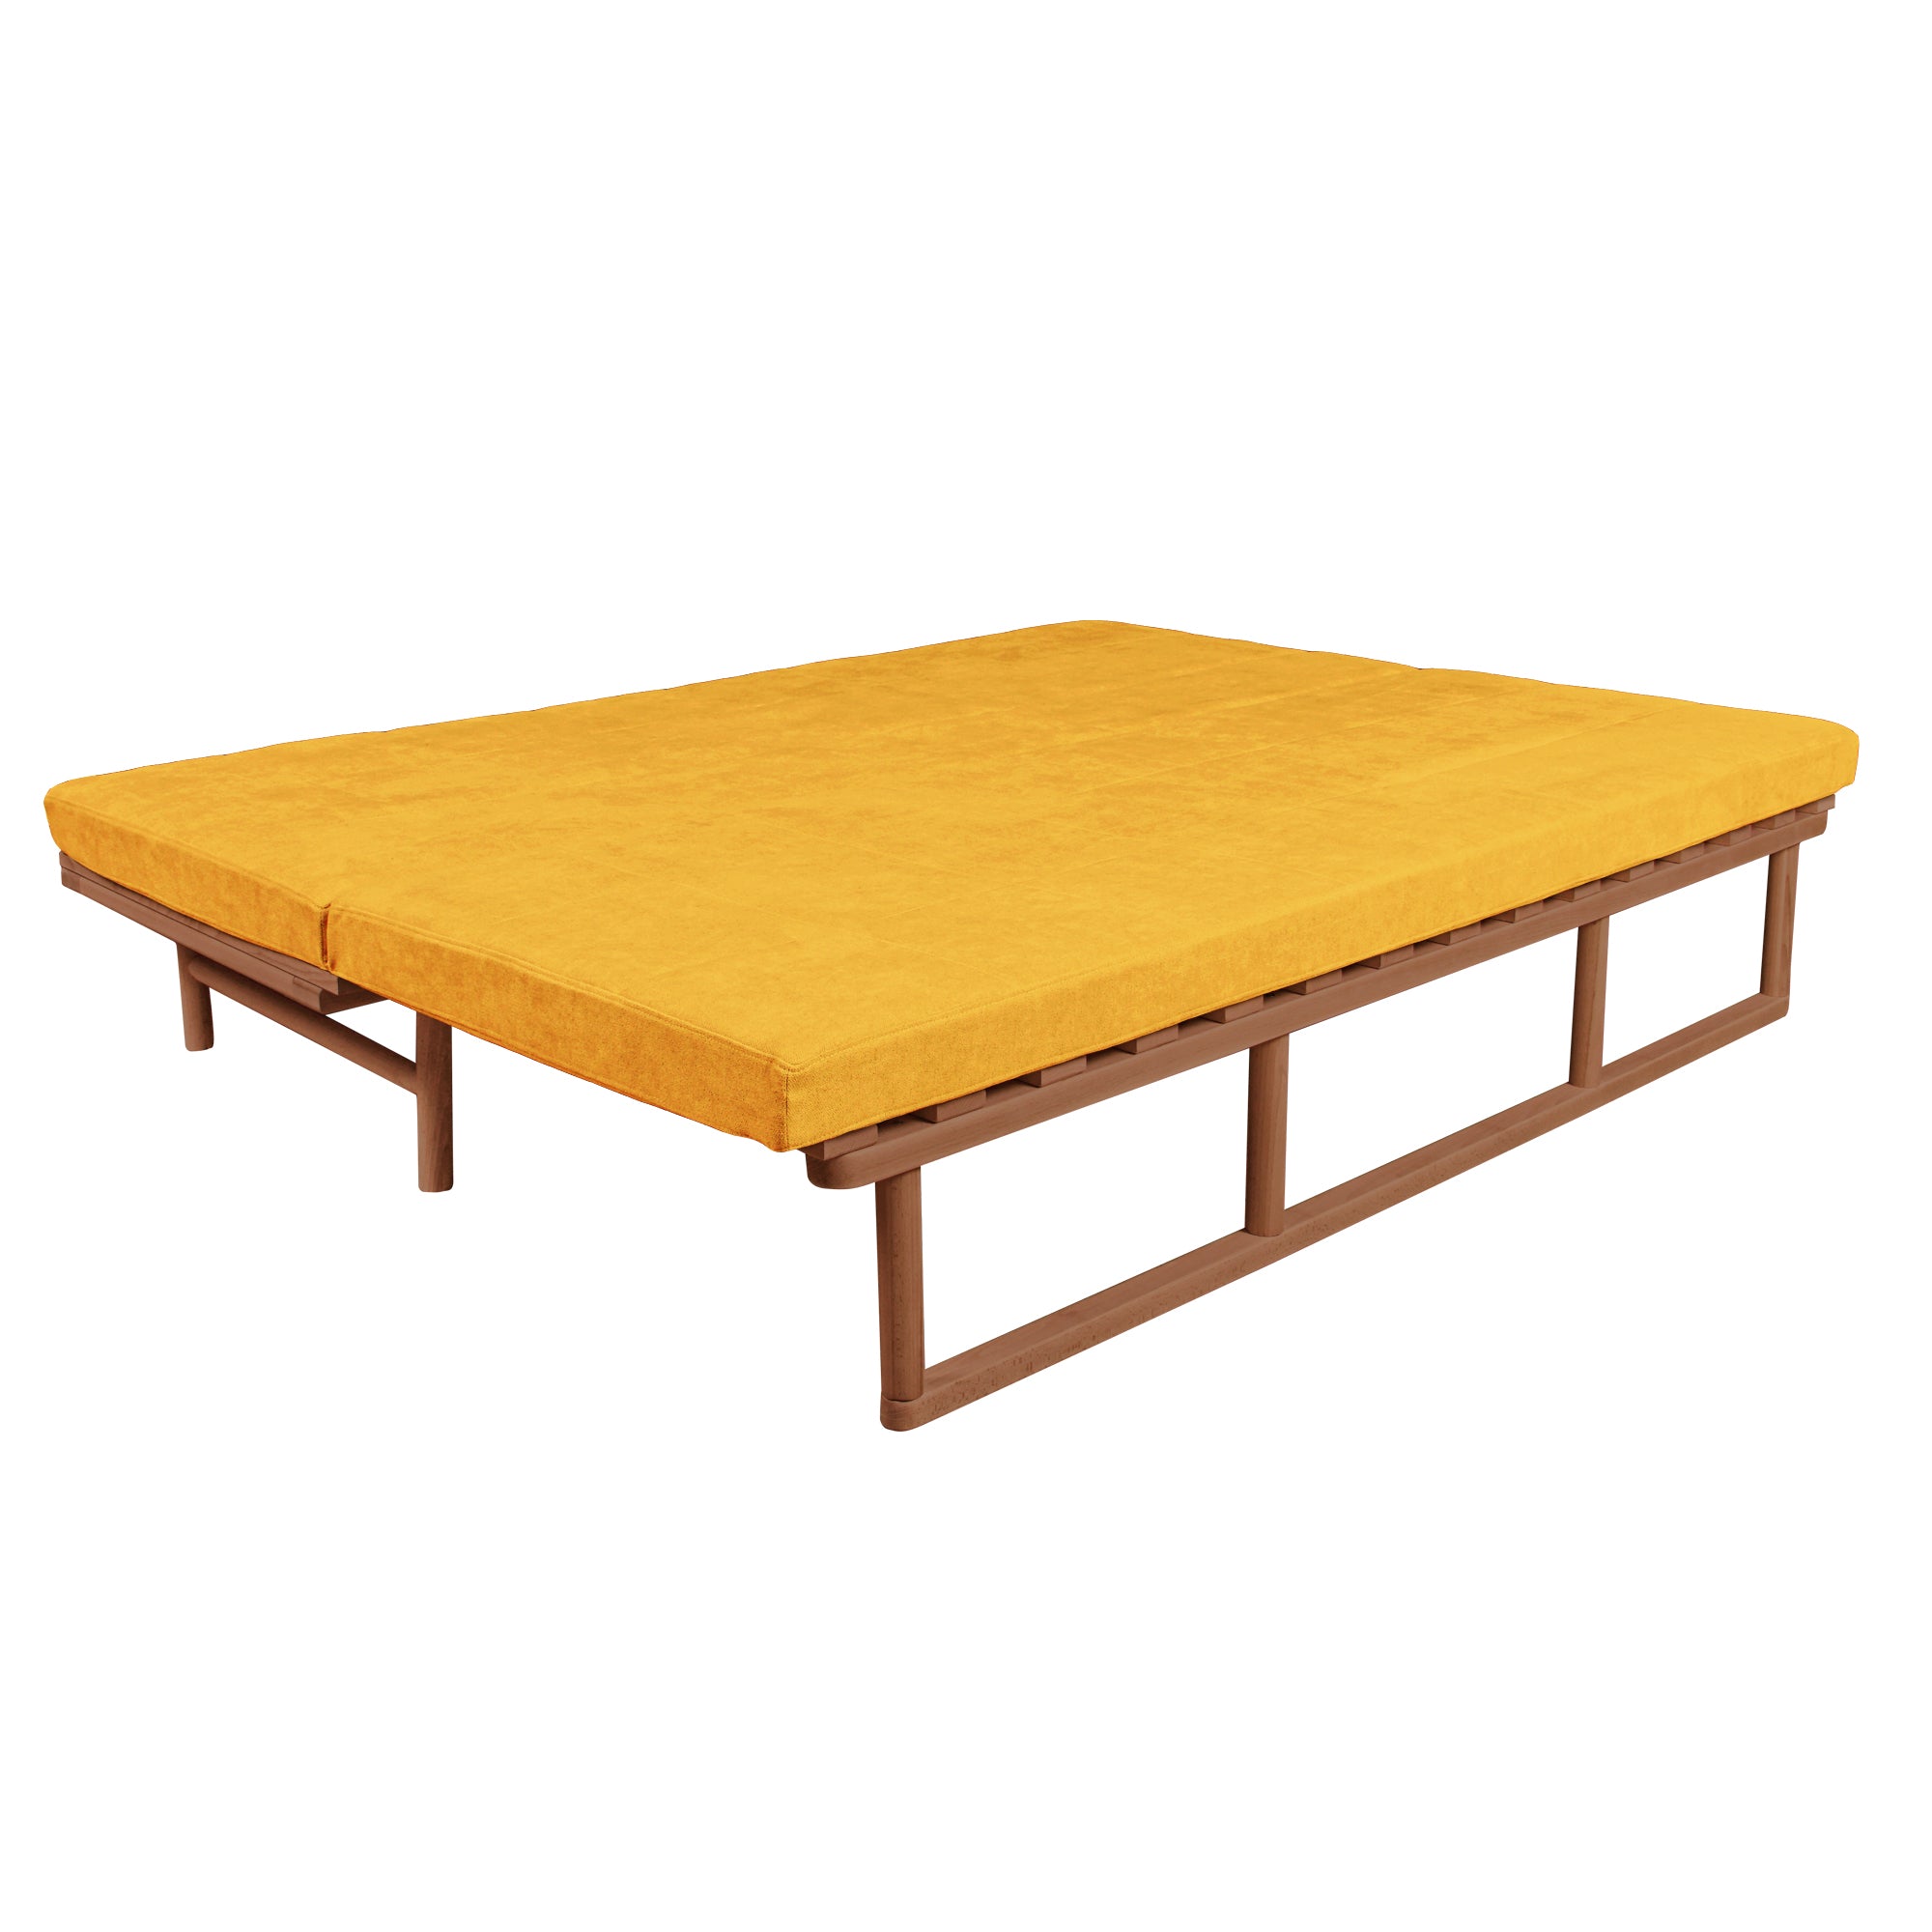 Le MAR Folding Daybed, Beech Wood Frame, Caramel Colour-yellow upholstery-folded view